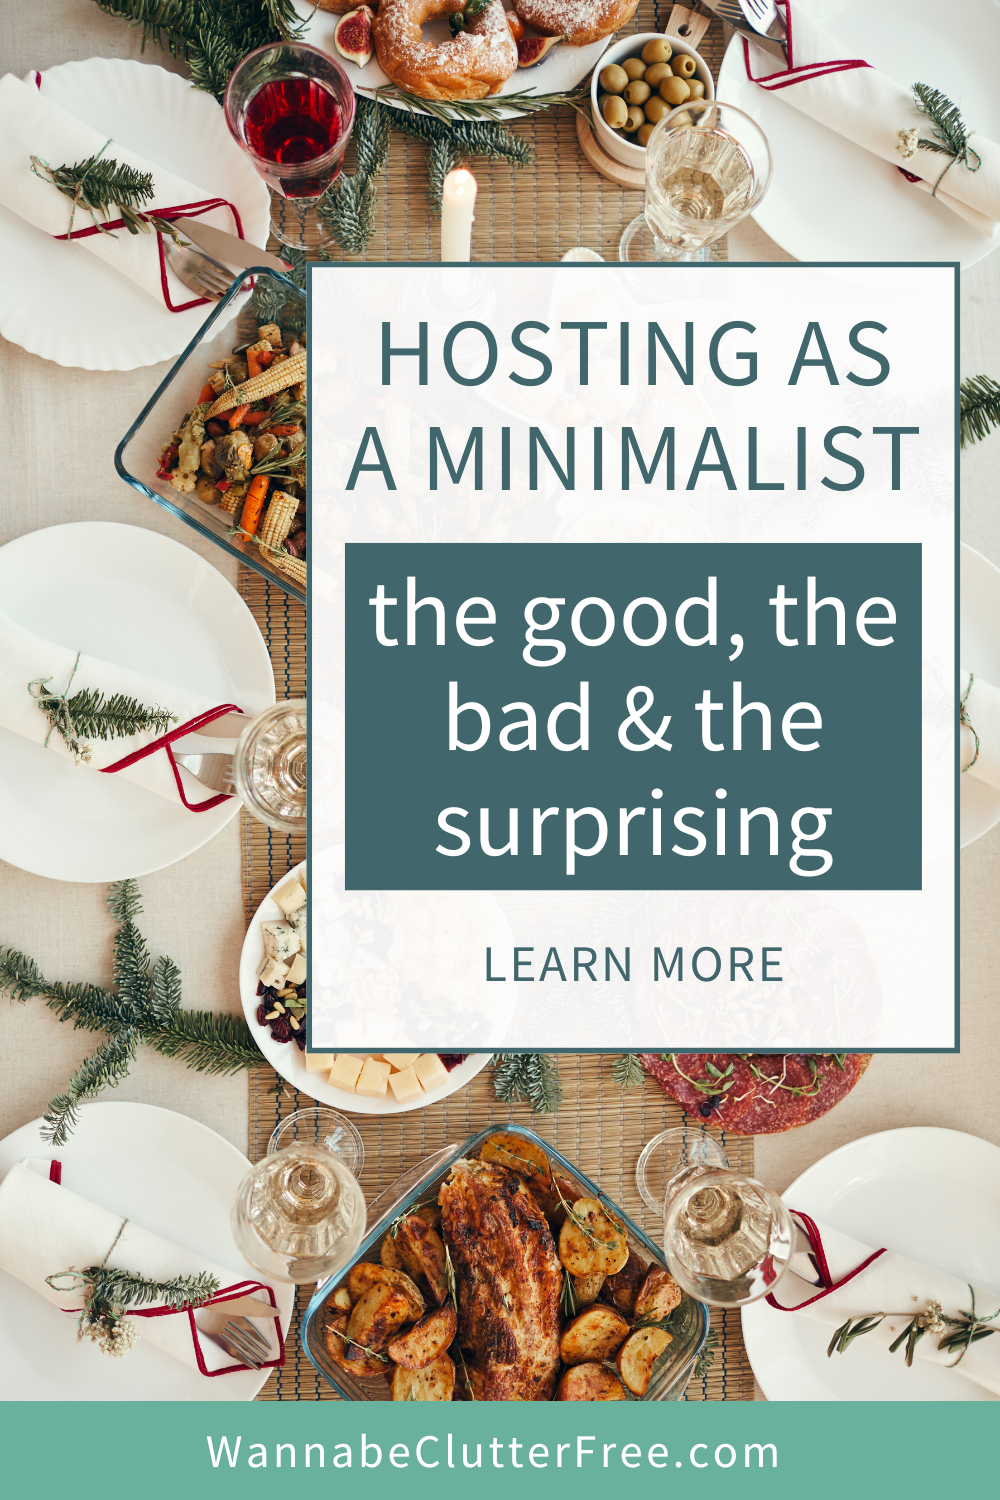 Hosting as a minimalist - the good, the bad, and the surprising